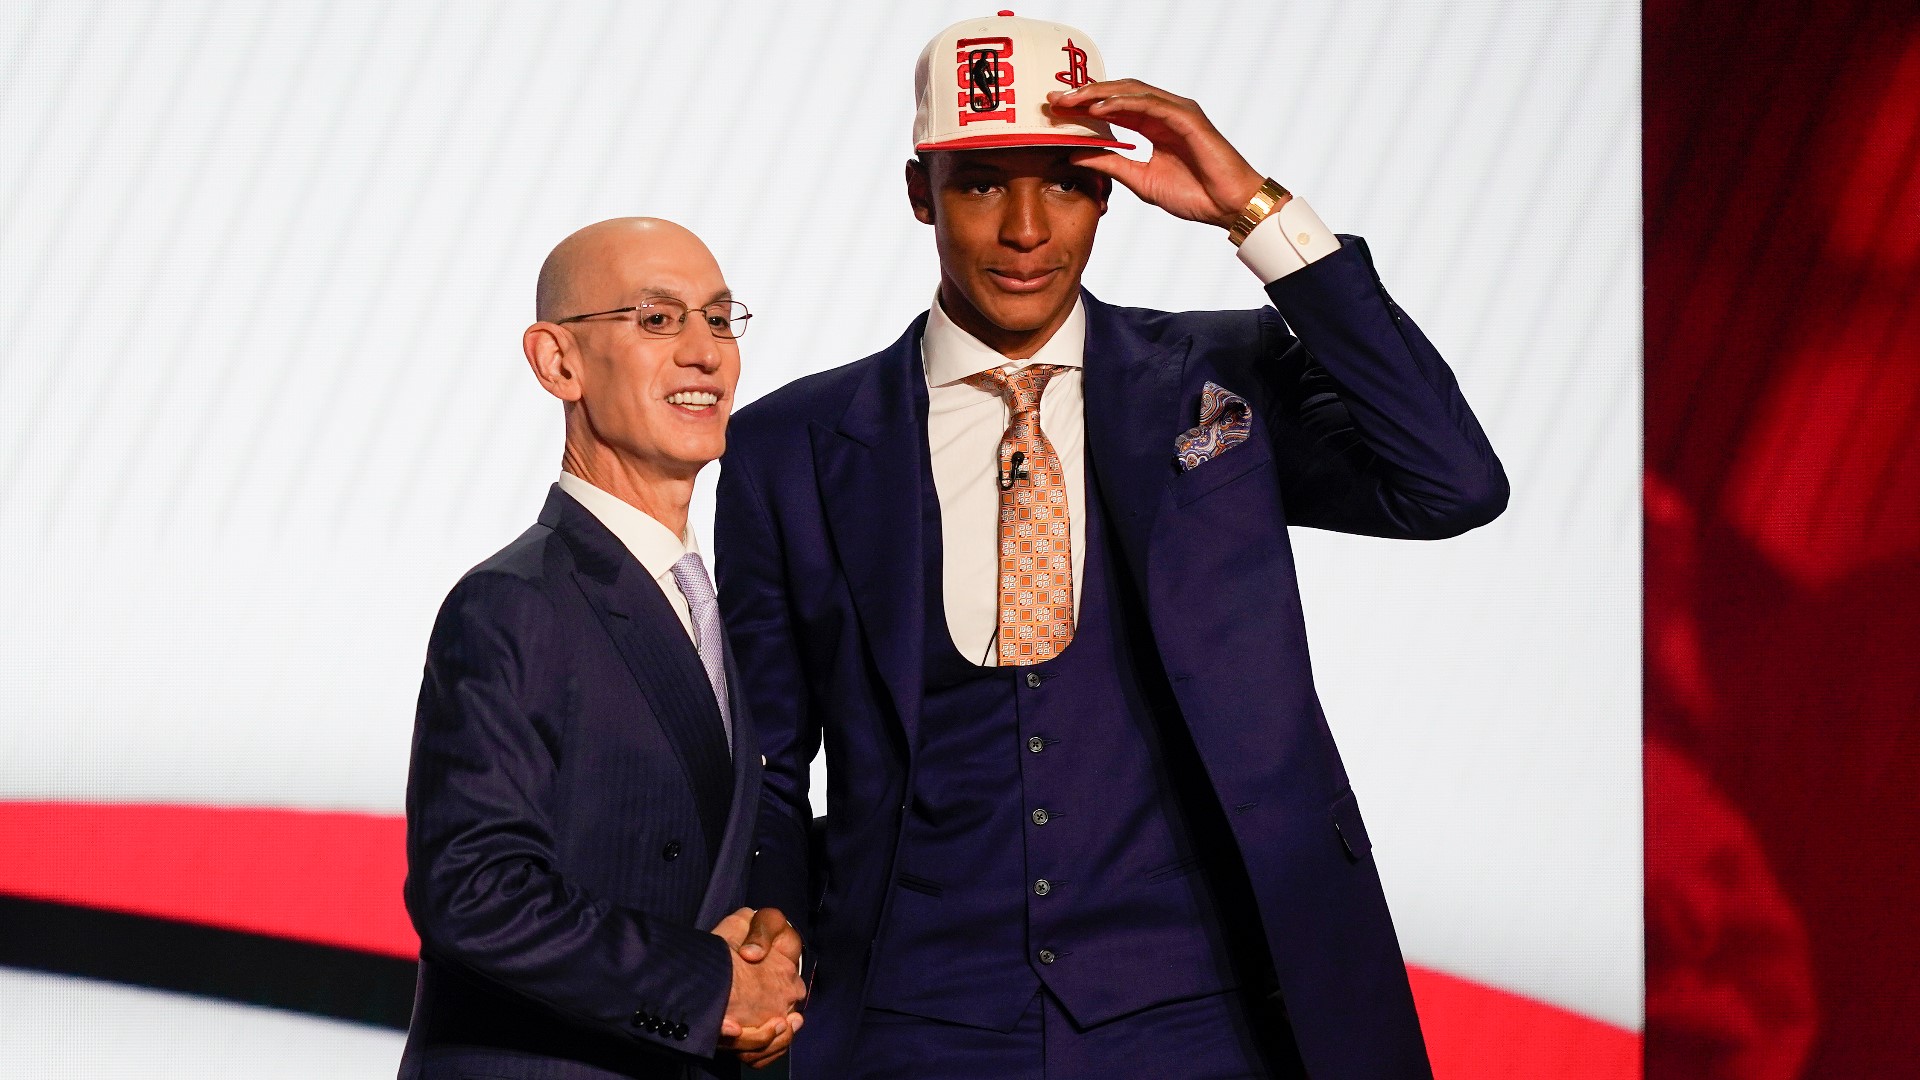 Auburn All-American Jabari Smith was selected No. 3 overall by the Houston Rockets on Thursday night at the 2022 NBA Draft held at the Barclays Center.